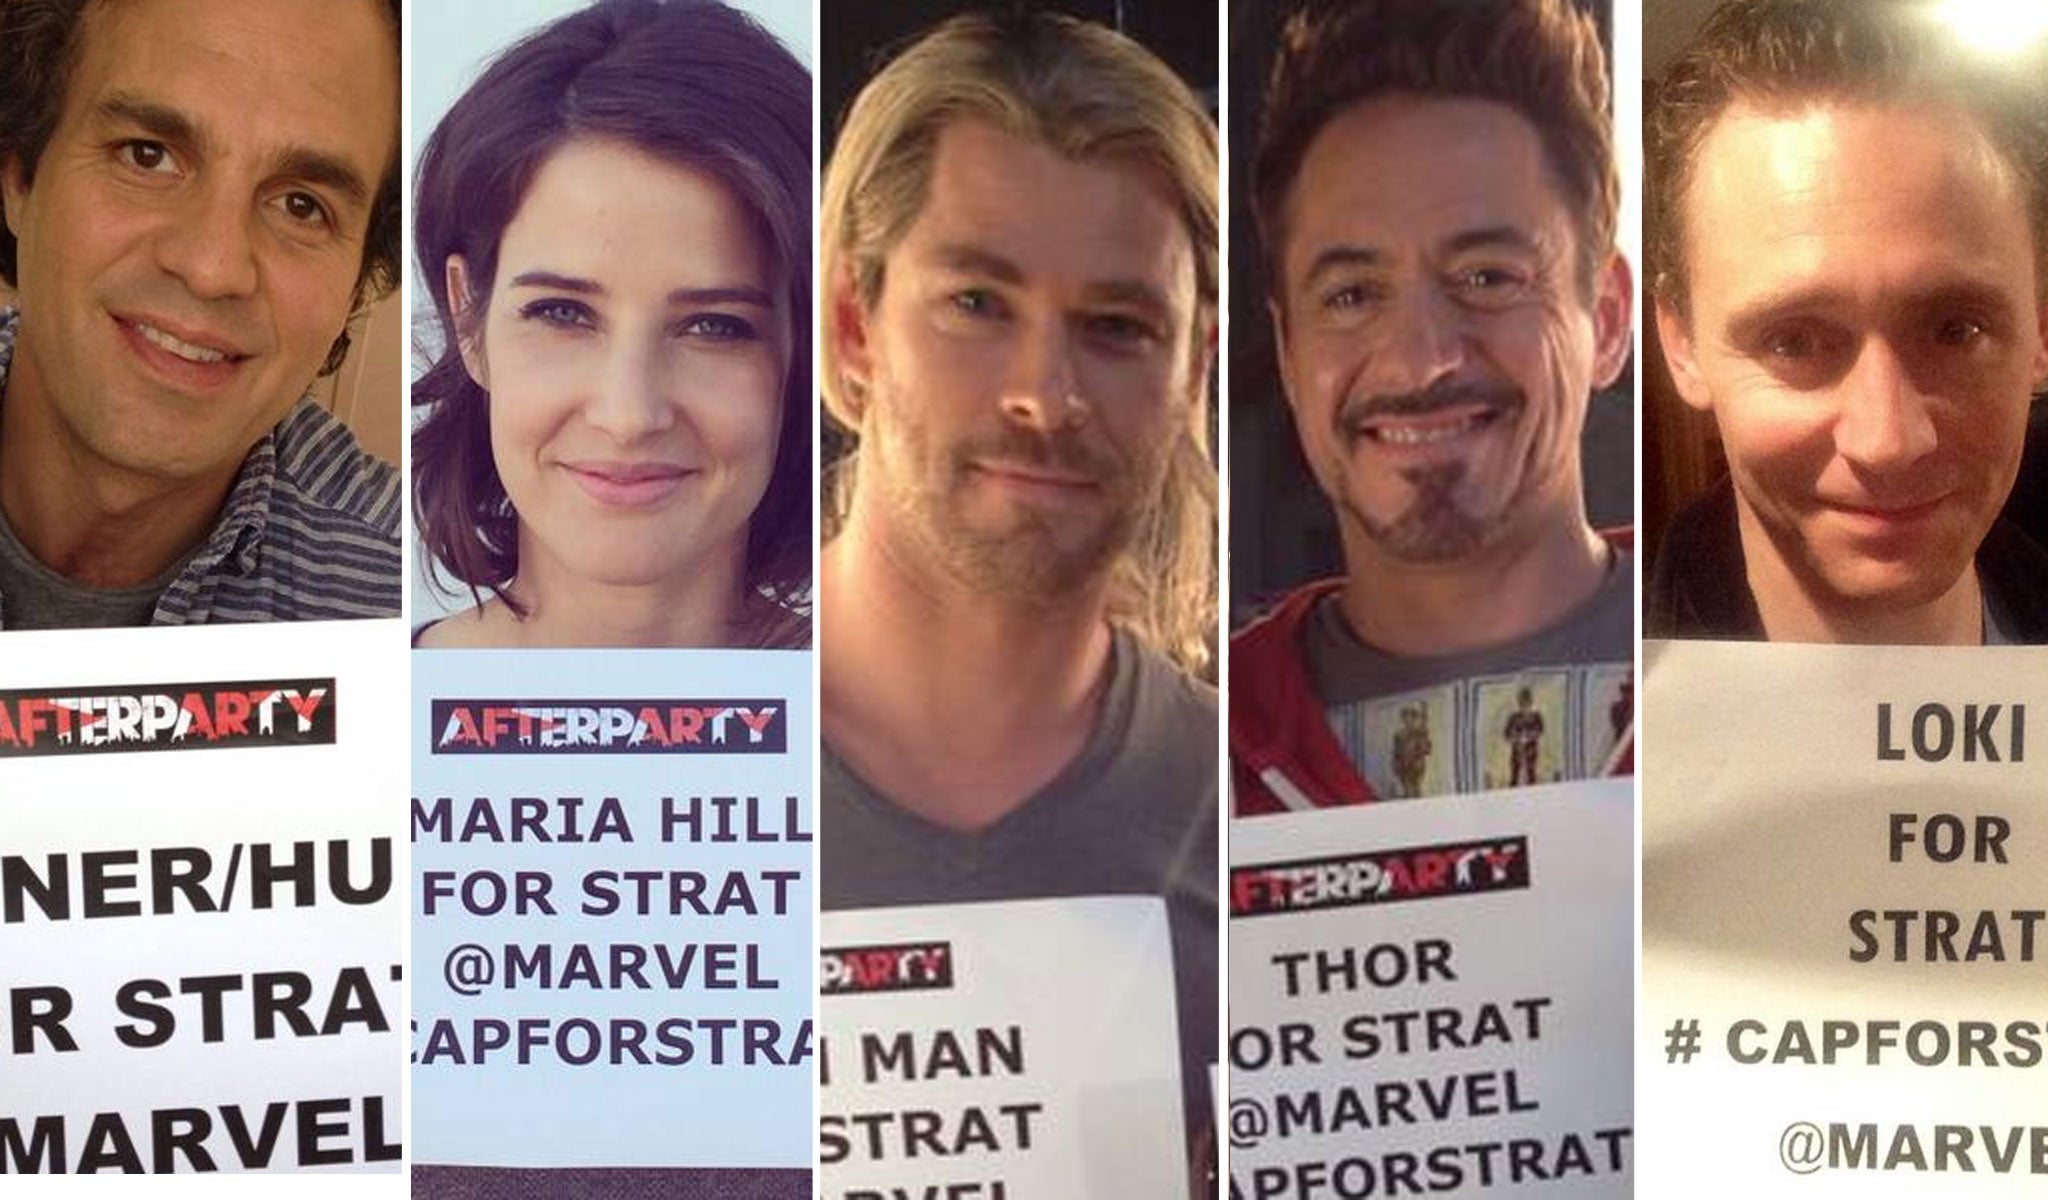 The #CapForStrat campaign was supported by some of Hollywood's biggest stars, including (from left to right): Mark Ruffalo (The Hulk), Cobie Smulders (Maria Hill), Chris Hemsworth (Thor), Rober Downey Jr (Iron Man) and Tom Hiddleston (Loki)